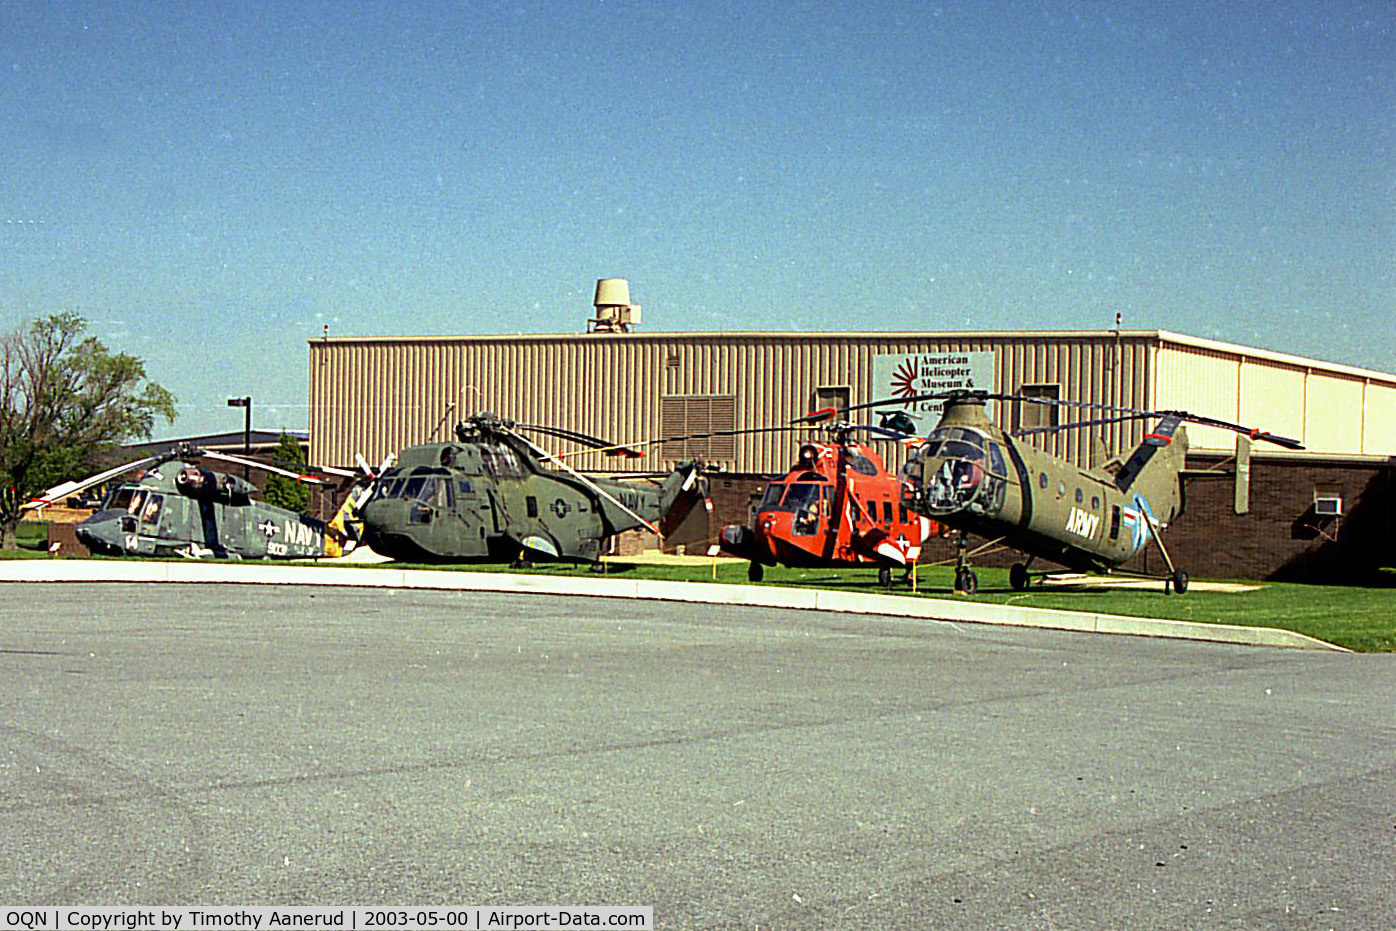 Brandywine Airport (OQN) - American Helicopter Museum, left-right, Kaman HH-2D, Sikorsky HH-3, Sikorsky HH-52, Piasecki CH-21B.  The musuem was closed the day I was here.  A Bell V-22 is also on display outside.